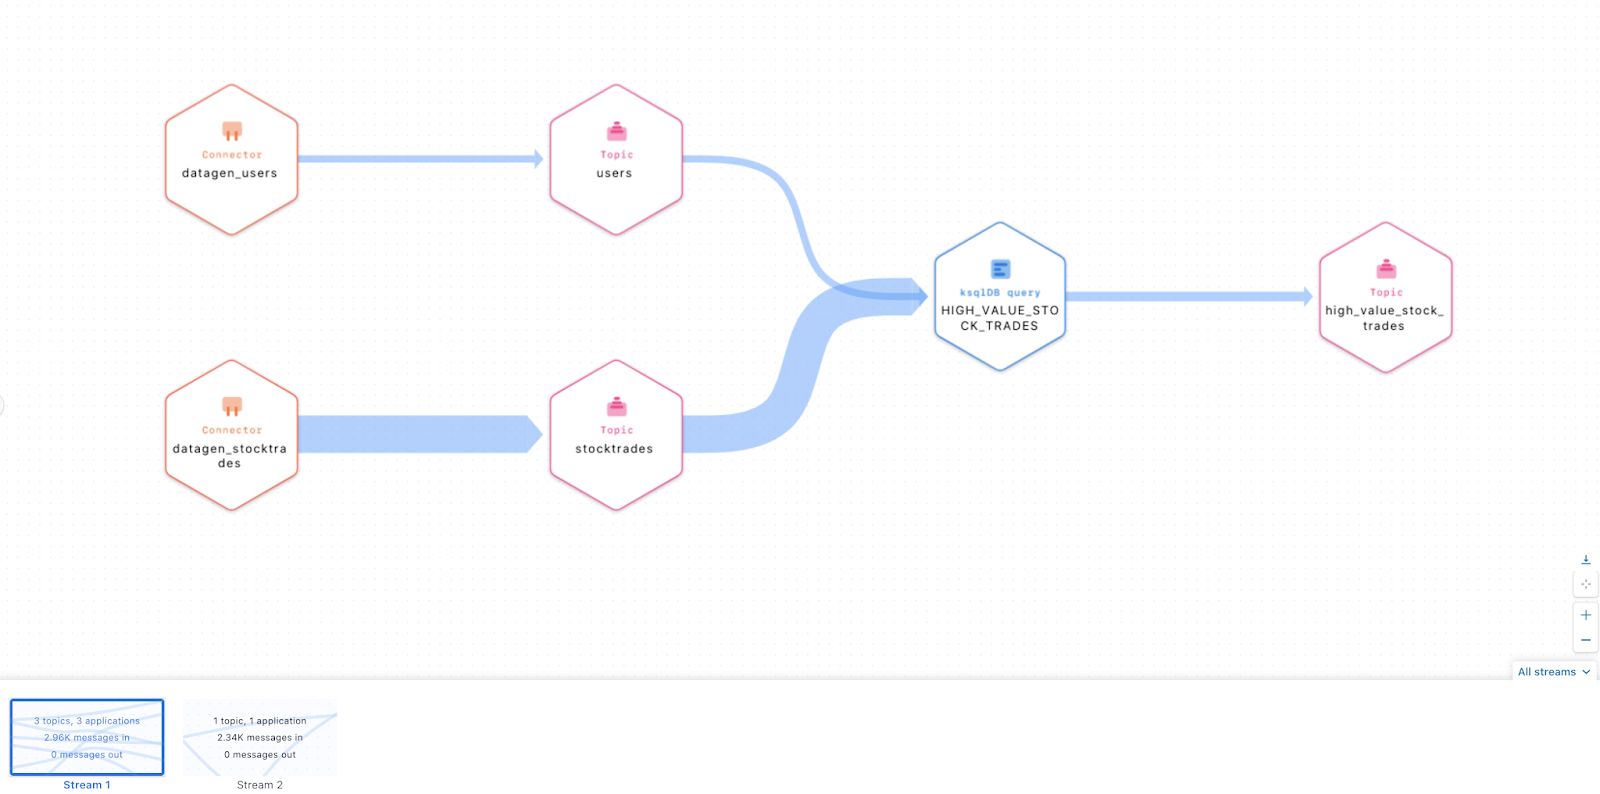 Stream Lineage helps you visualize and find dependencies